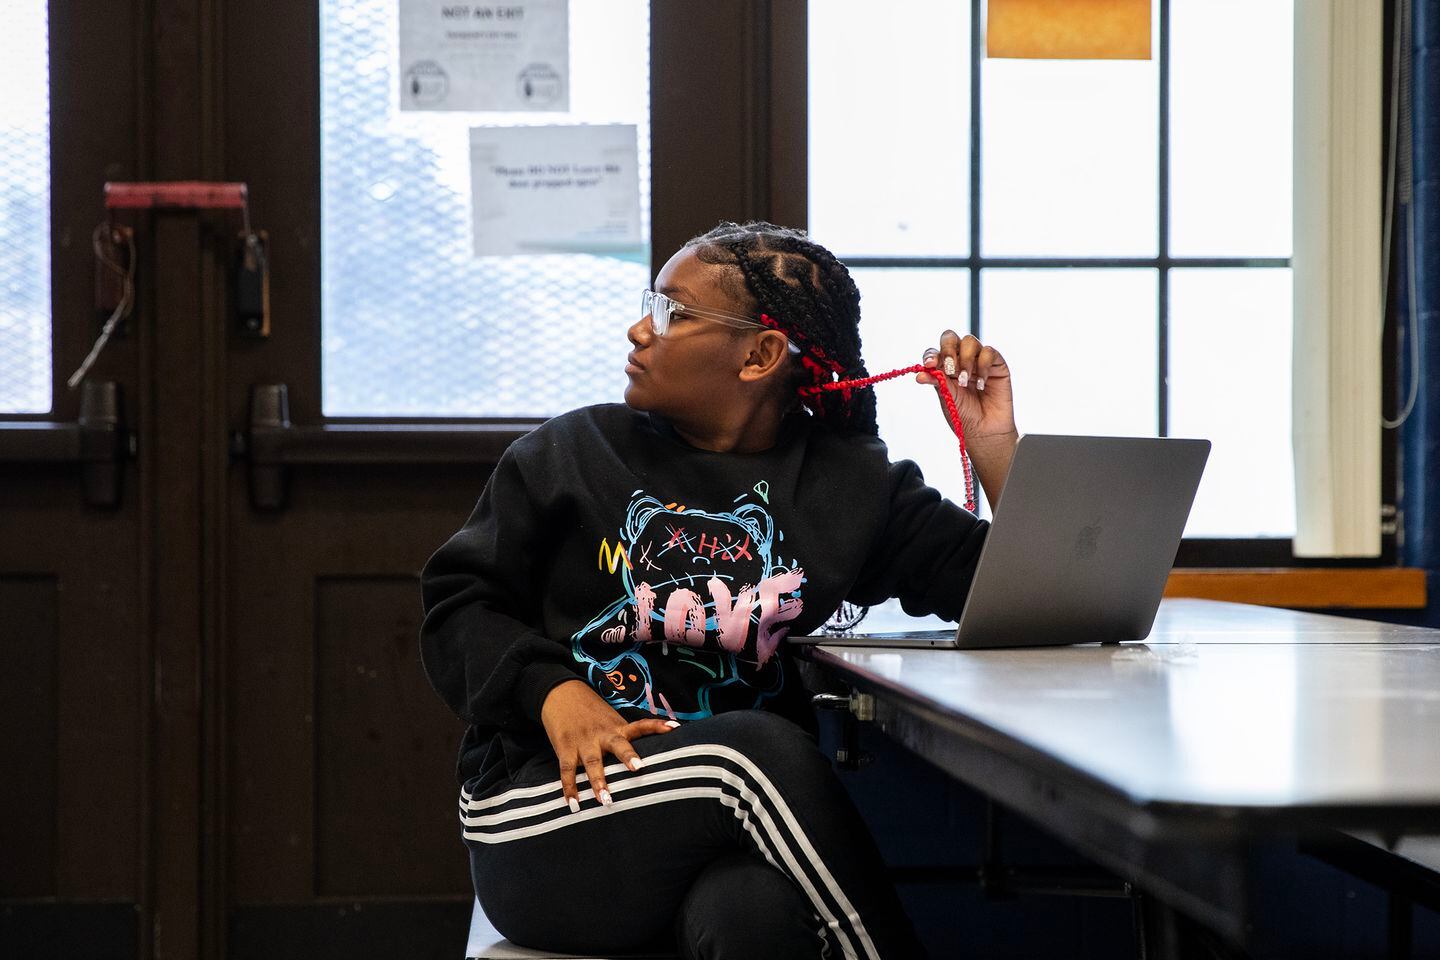 Eight grader Leona Wright, 13, works on a computer program during Konnection Klub at Durfee.